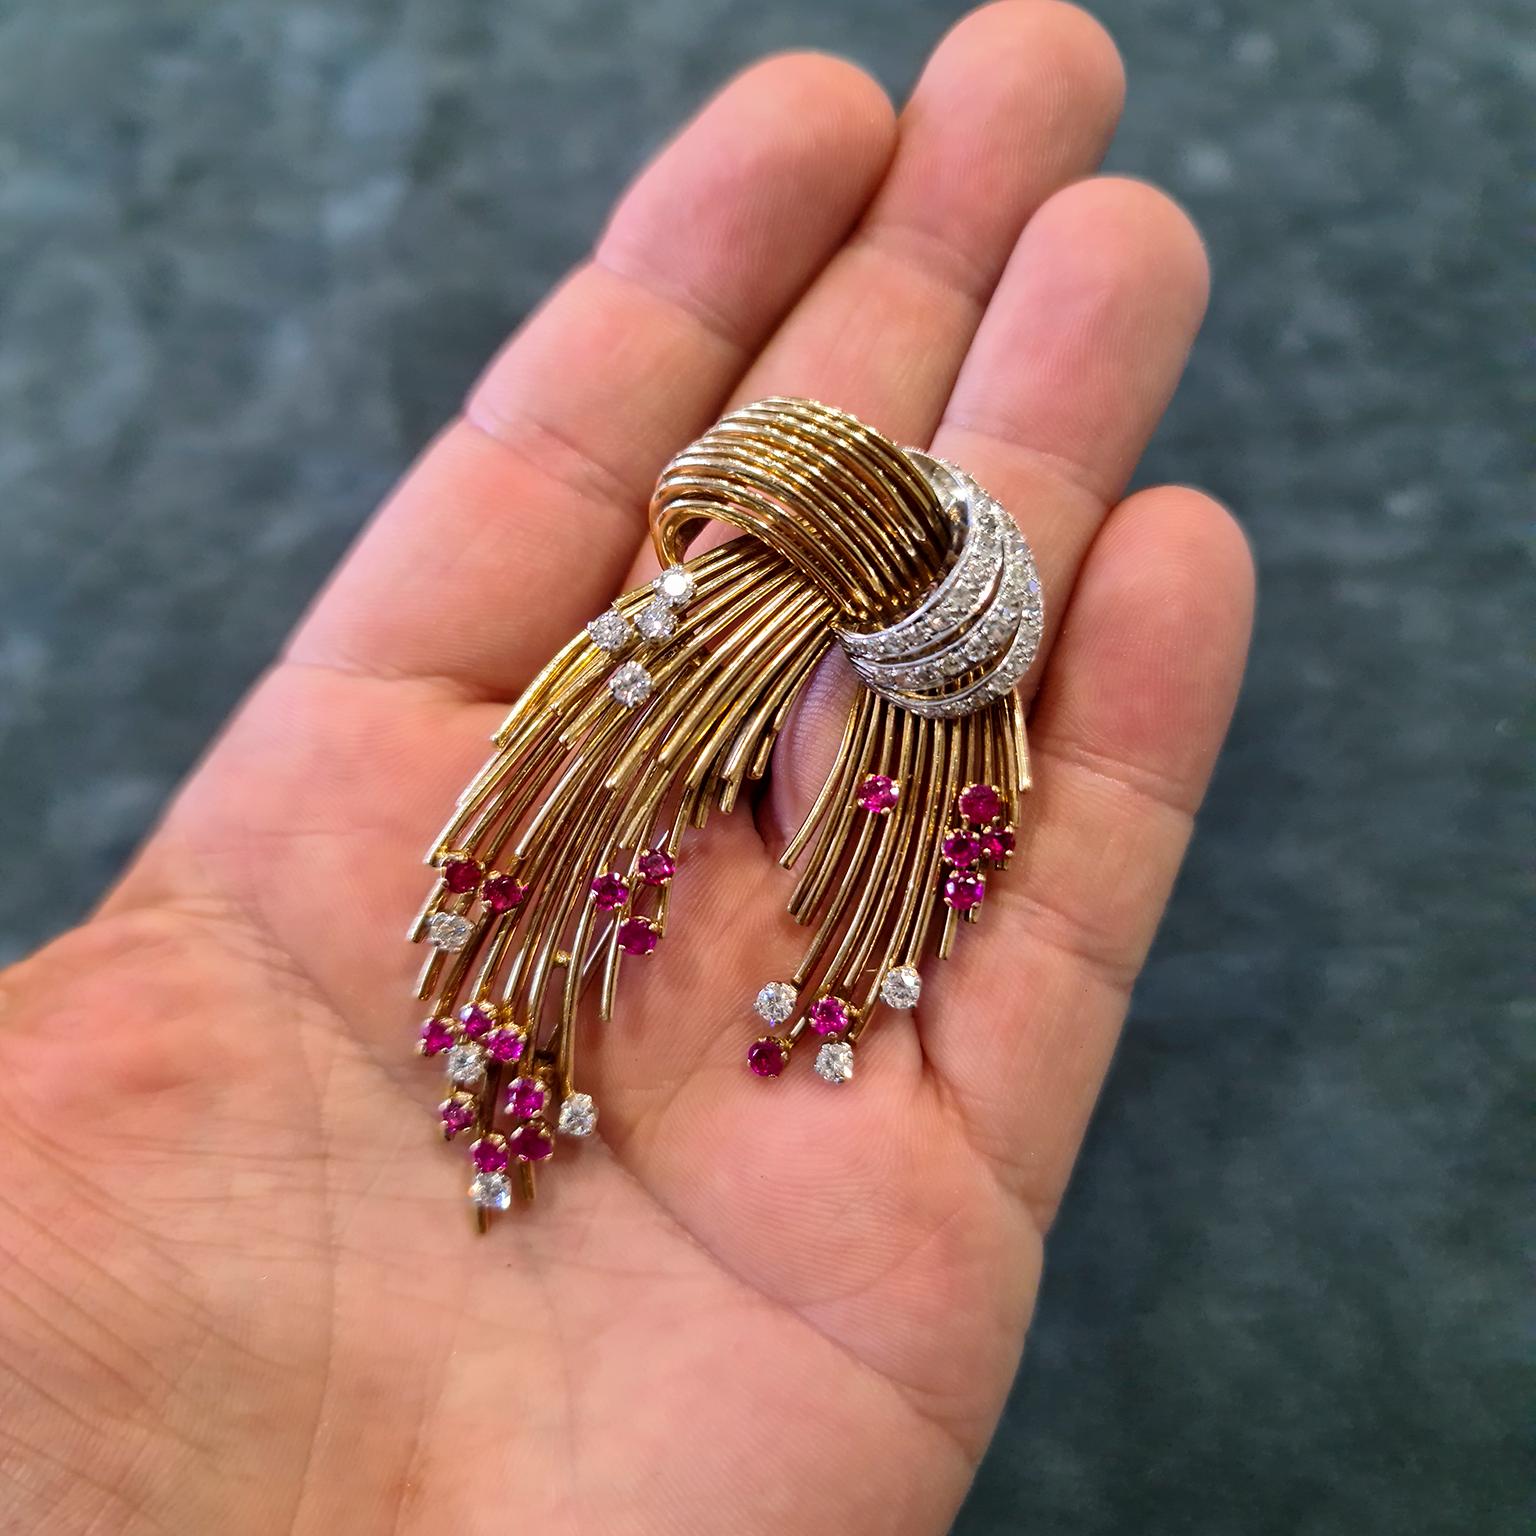 A stylish and impressive brooch, instantly recognisable as Kutchinsky. Wires of 18-carat yellow gold formed in a spray fashion, mounted with blood-red rubies and diamonds. Hallmarked London. Total diamond carat weight of approximately 2.50 carats,